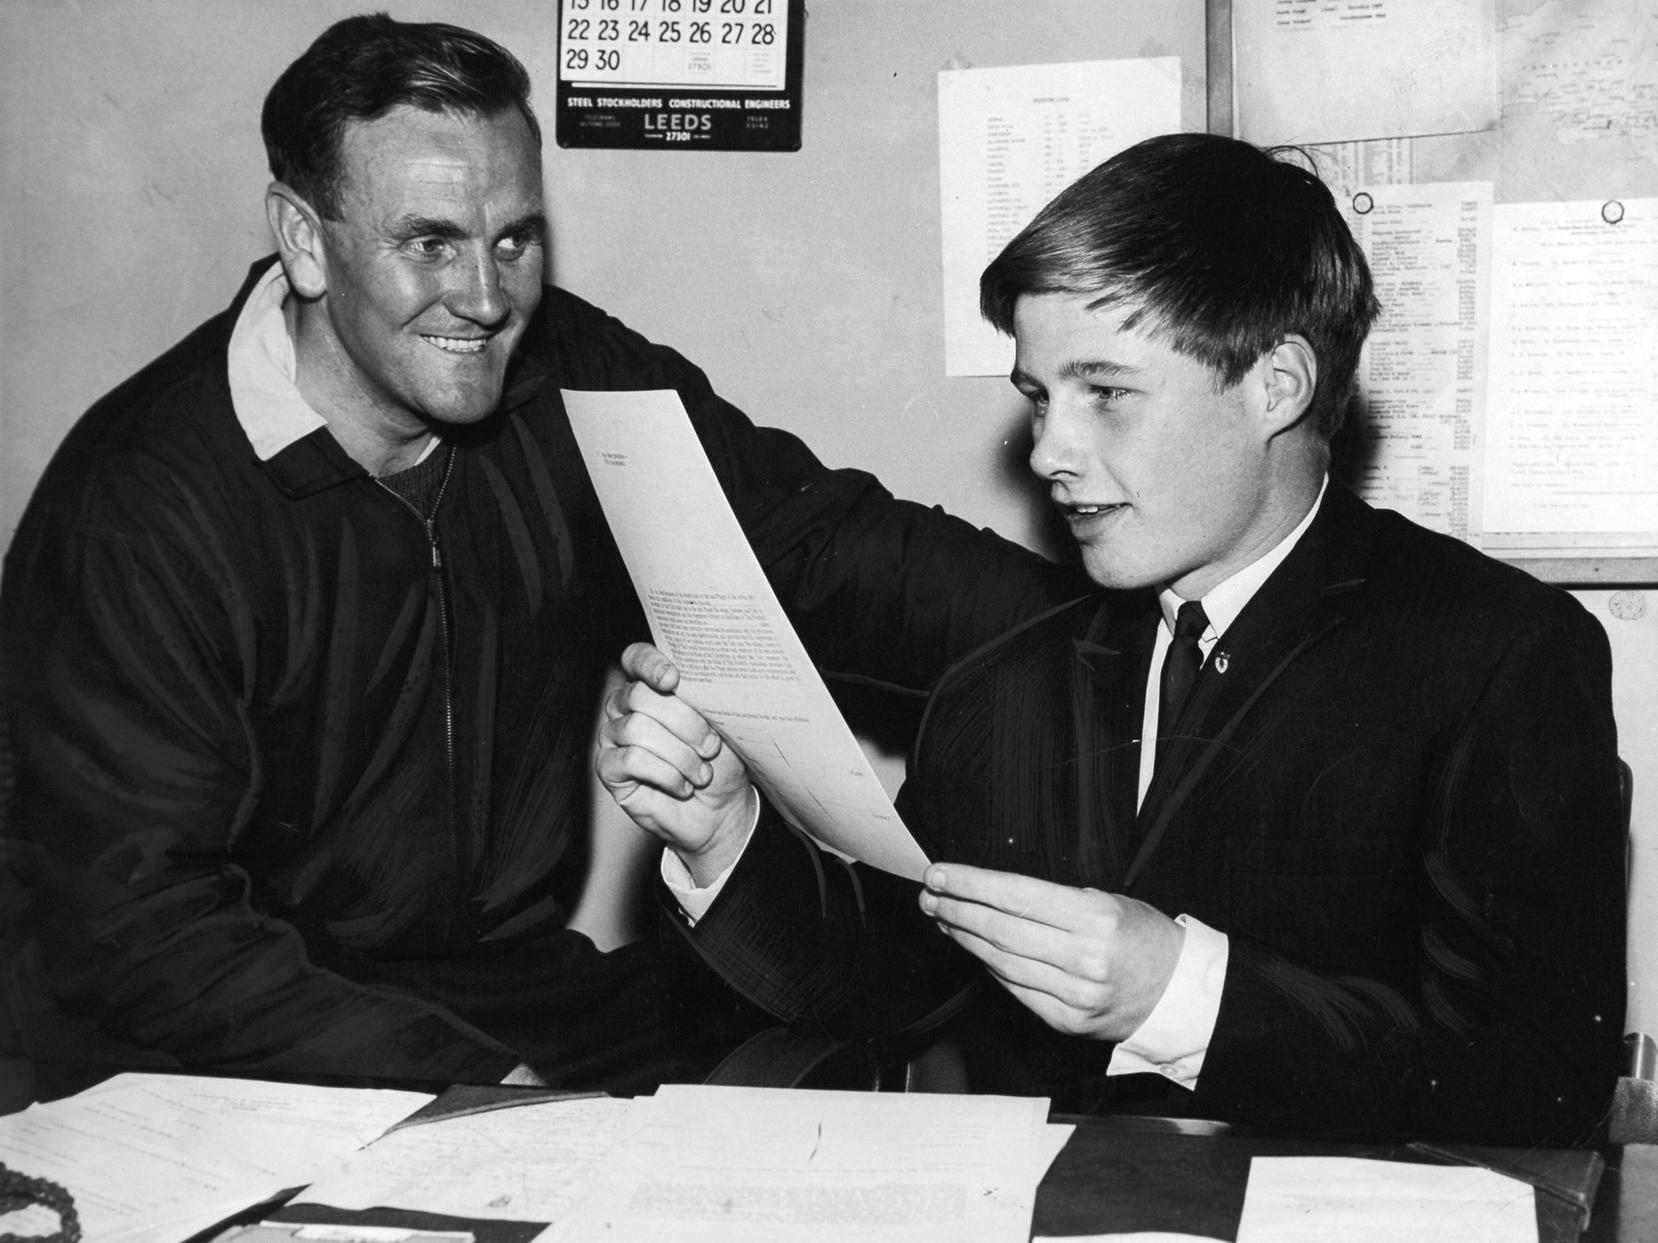 Young Jimmy Lumsden is seen reading his form, watched by team manager Don Revie.